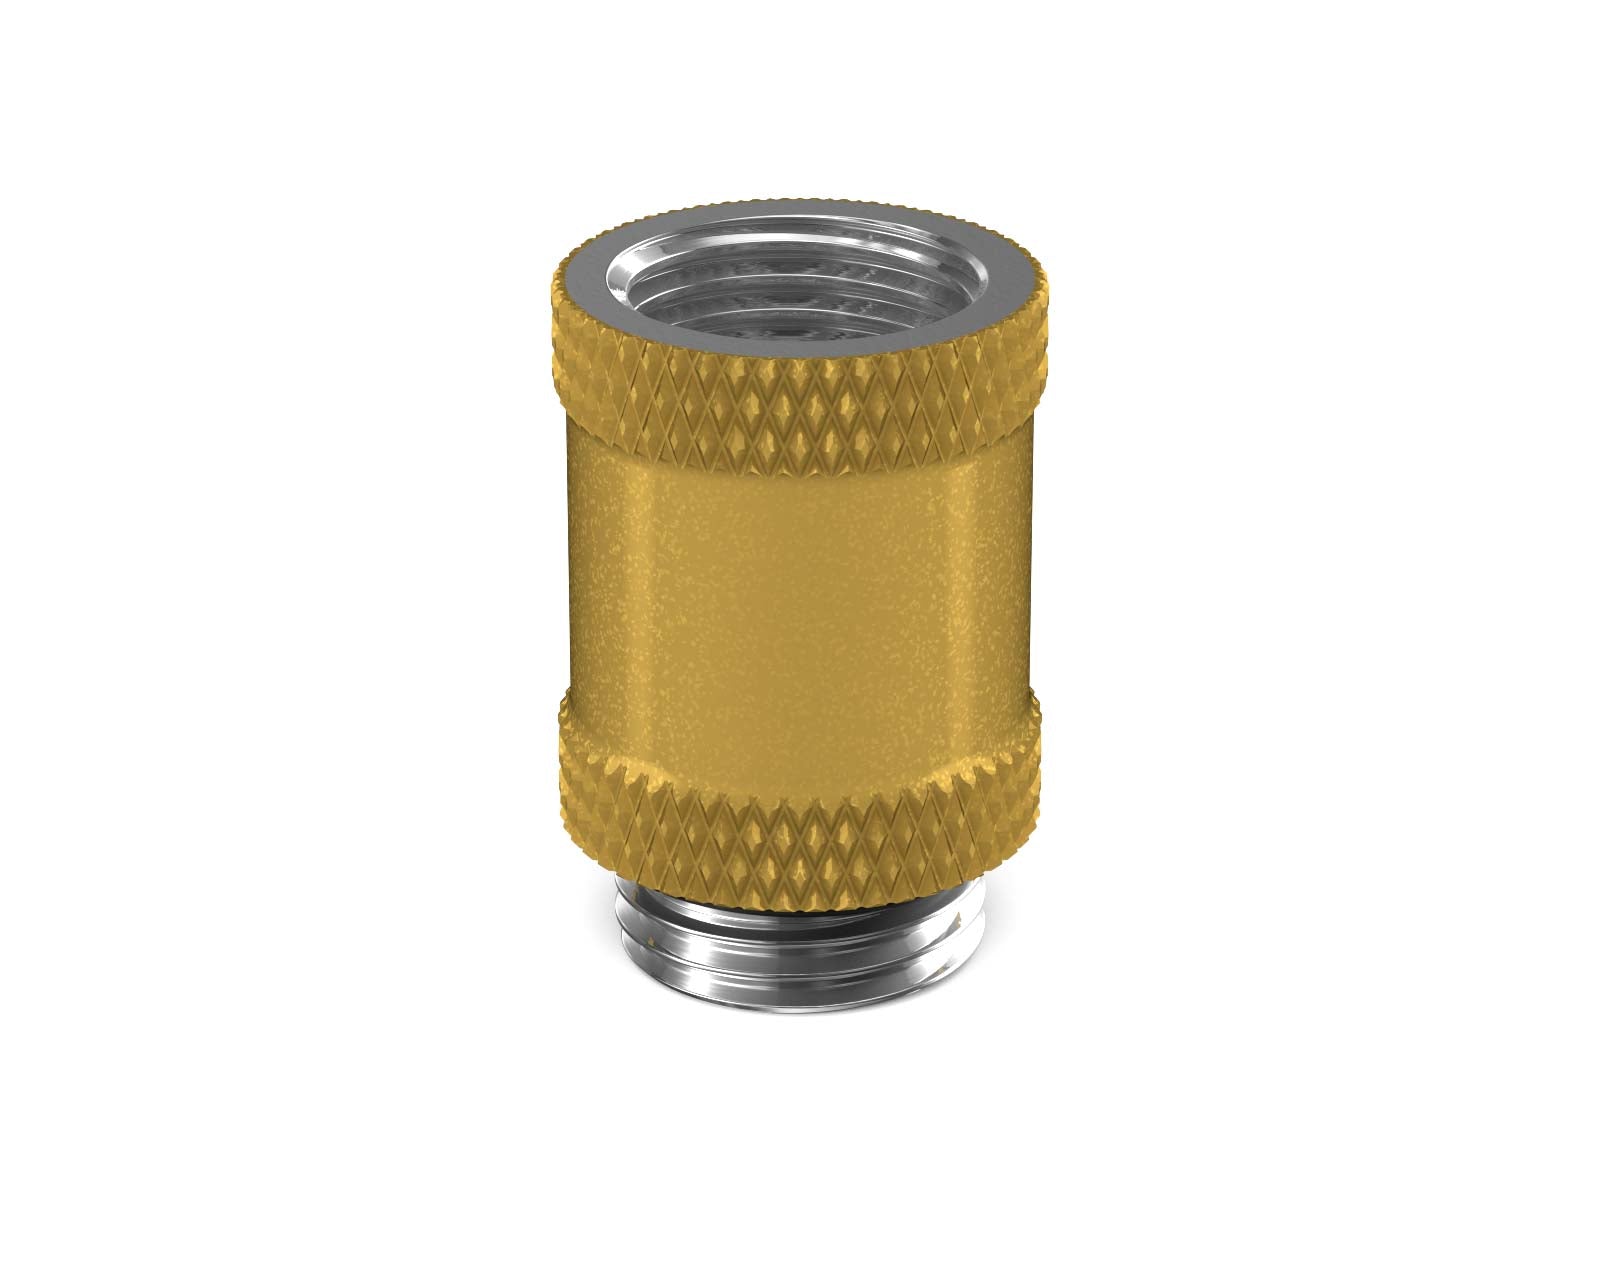 PrimoChill Male to Female G 1/4in. 20mm SX Extension Coupler - PrimoChill - KEEPING IT COOL Gold